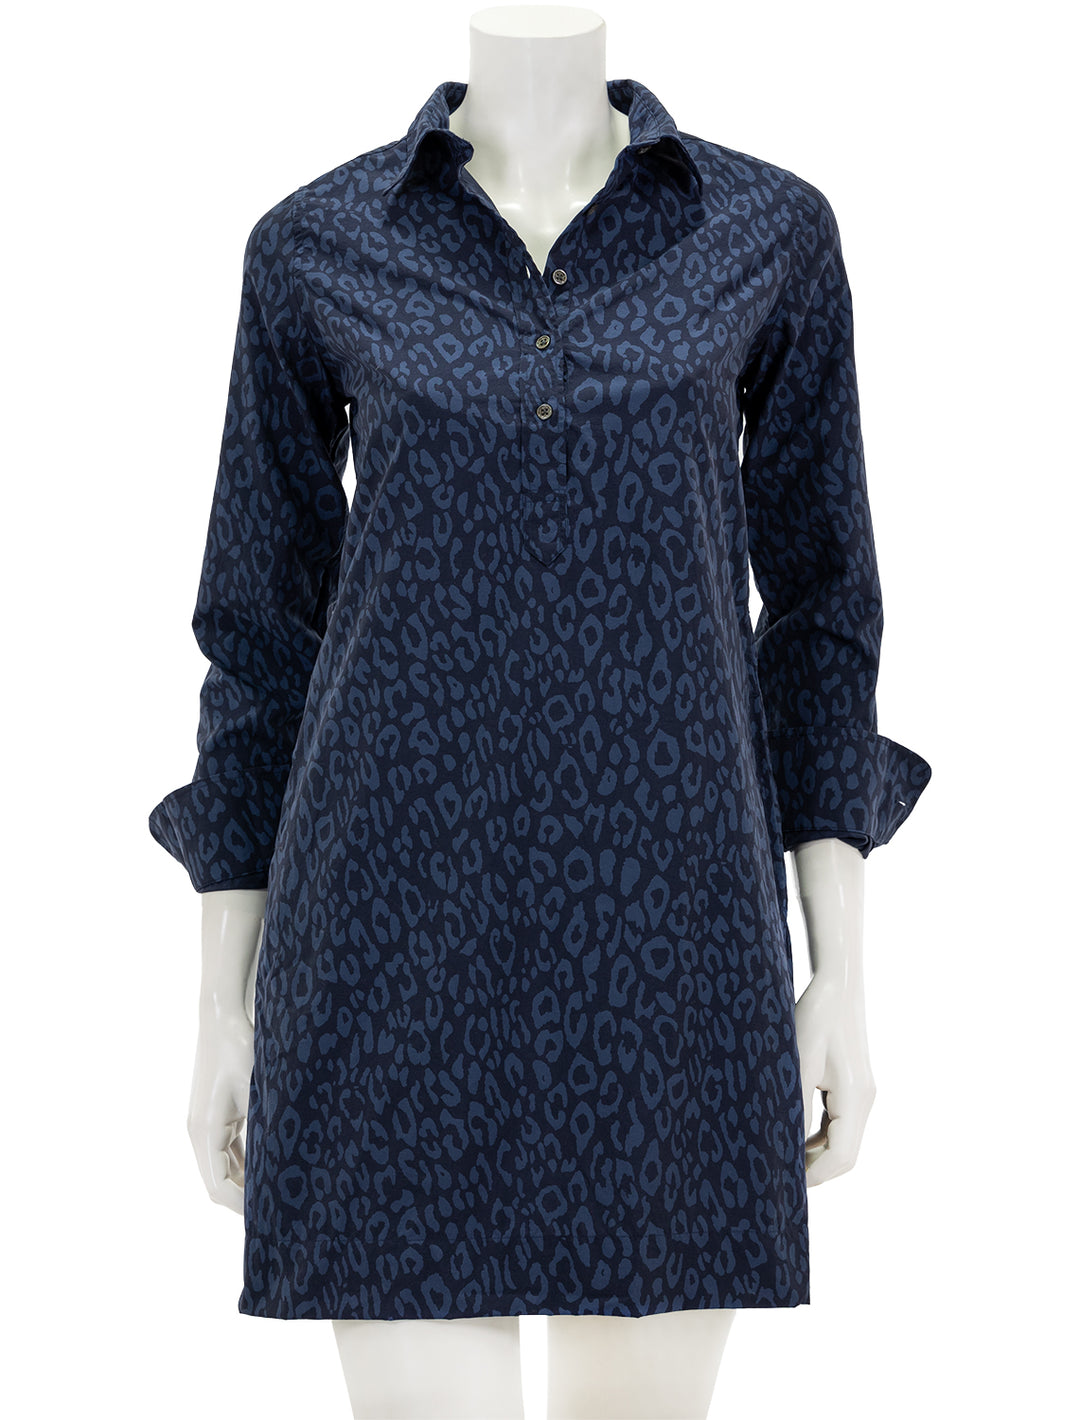 Front view of Ann Mashburn's long sleeve popover dress in blue and navy leopard.